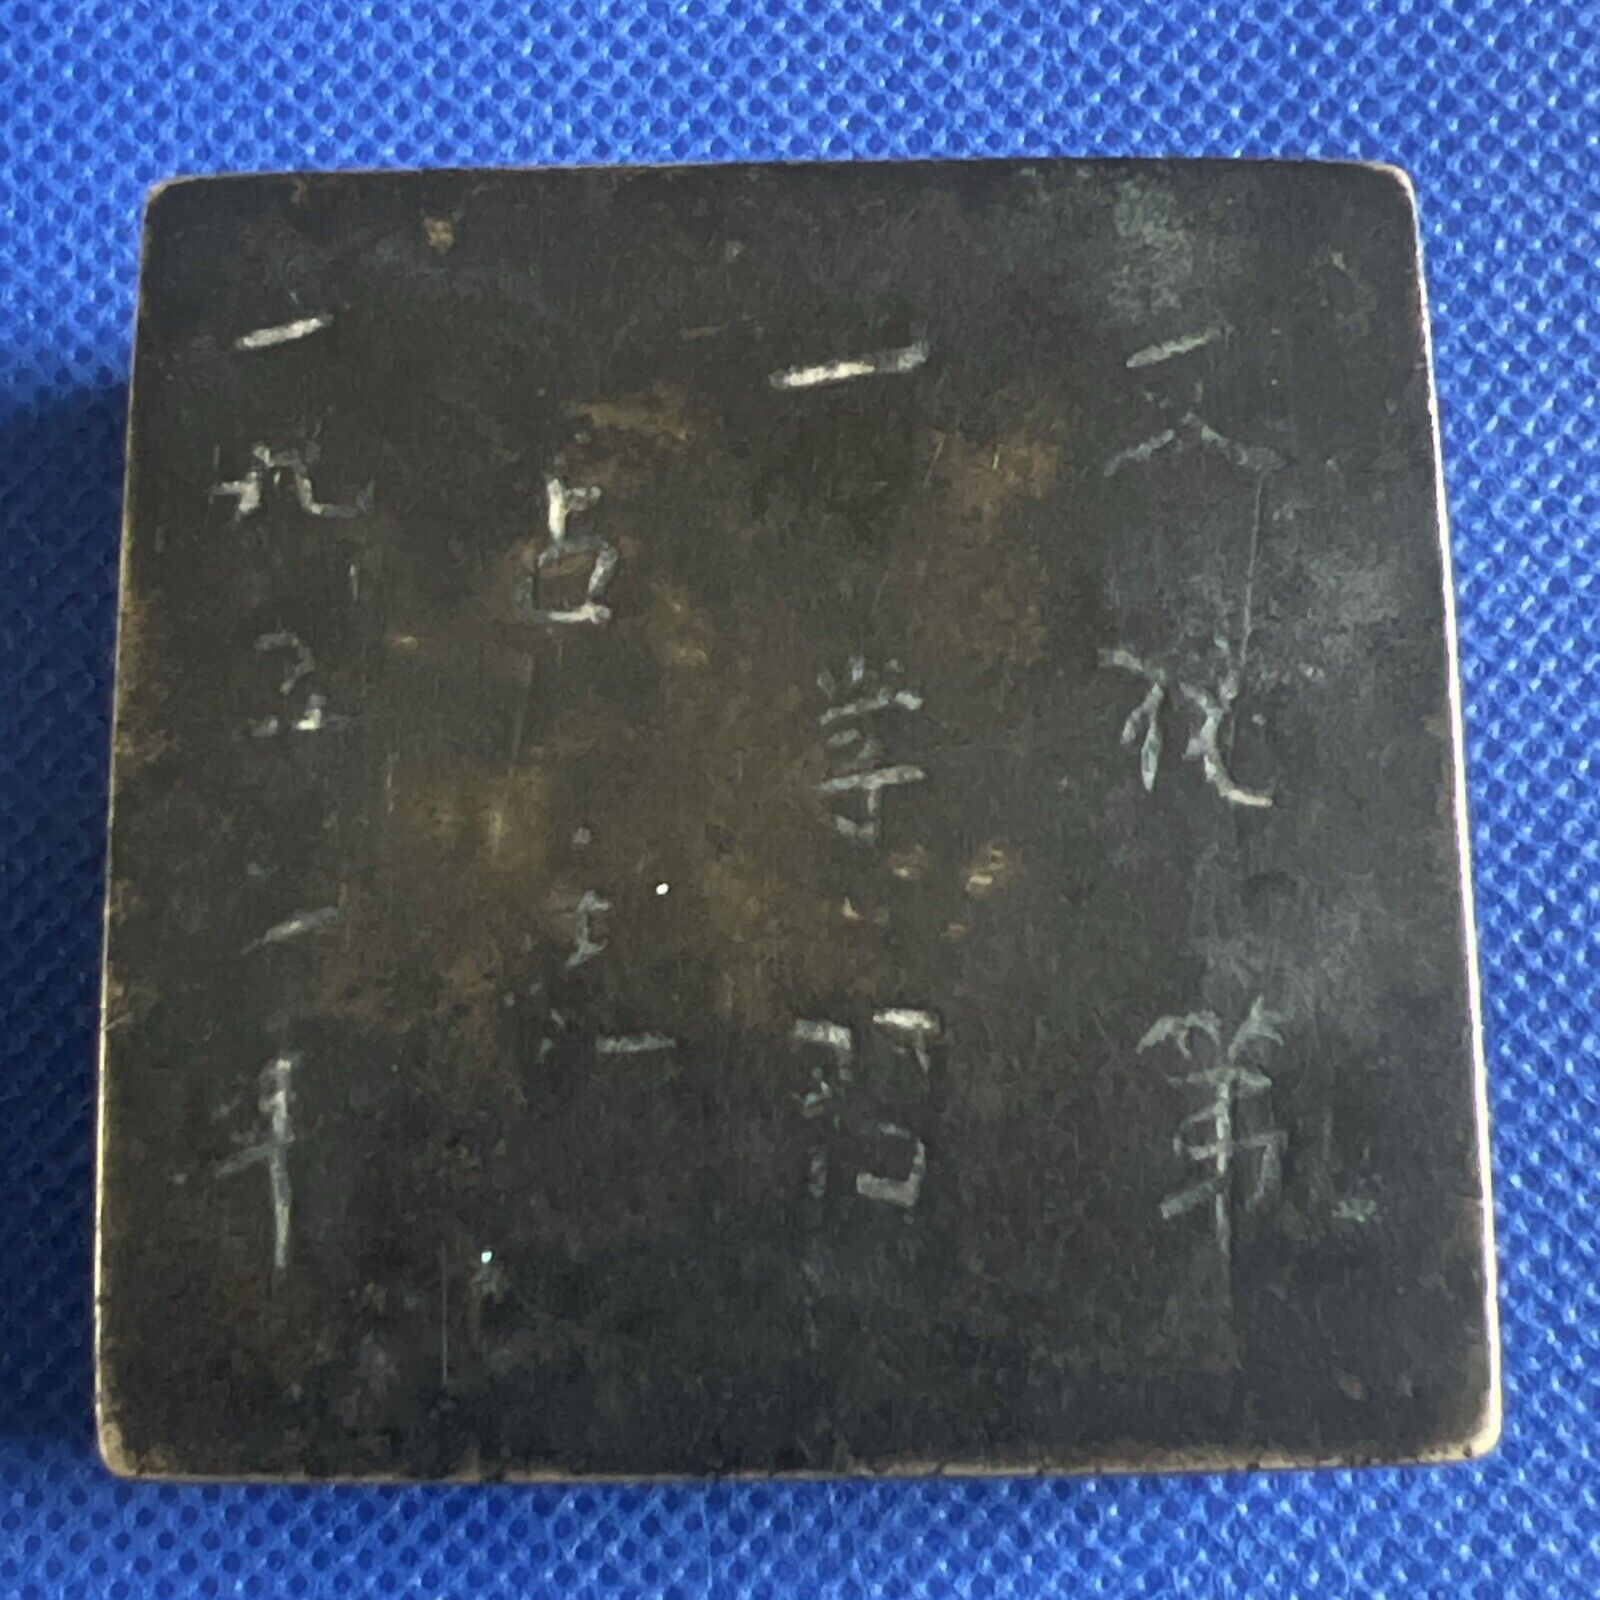 Ink box, one of the four treasures of the Chinese study 铜墨盒，文化第一 学习占先 一九五二年#A150